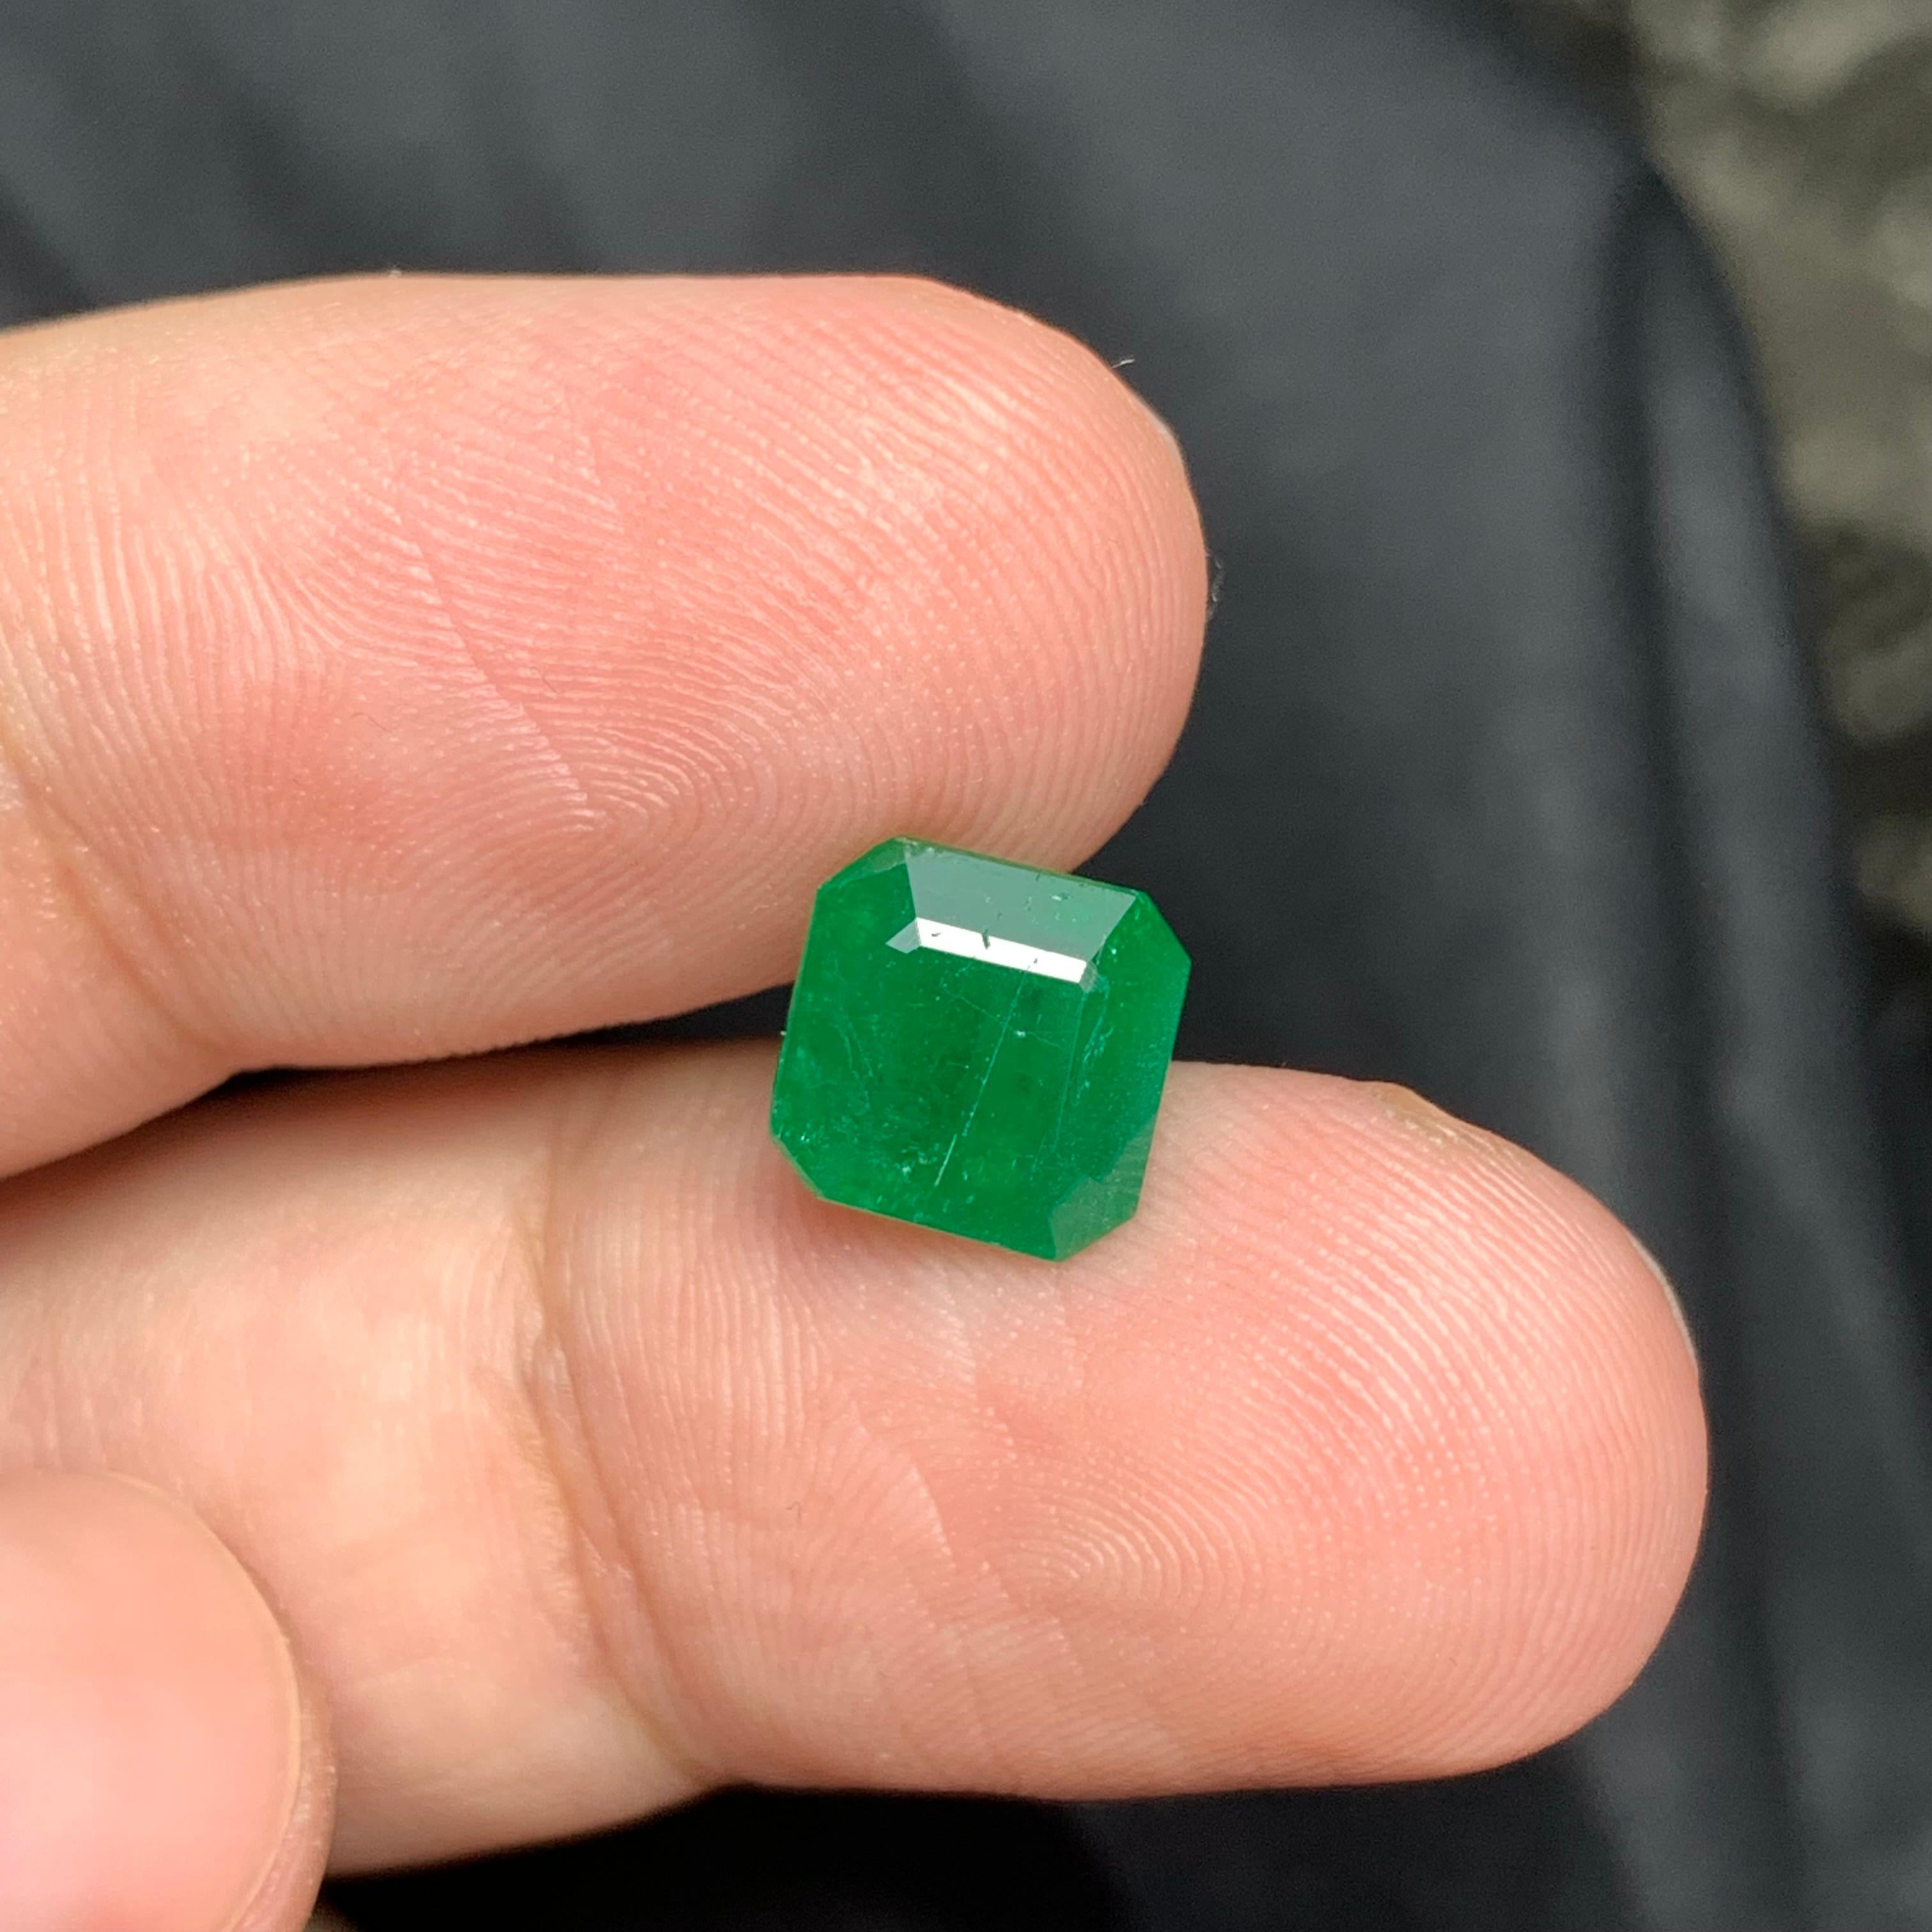 Loose Emerald
Weight: 2.30 Carats
Dimensions: 8 x 8 x 5.3 Mm
Origin: Swat Pakistan
Shape: Square
Color: Green
Treatment: Non
Certificate: On Demand

The Swat Emerald, also known as the Mingora Emerald, is a rare and highly prized gemstone